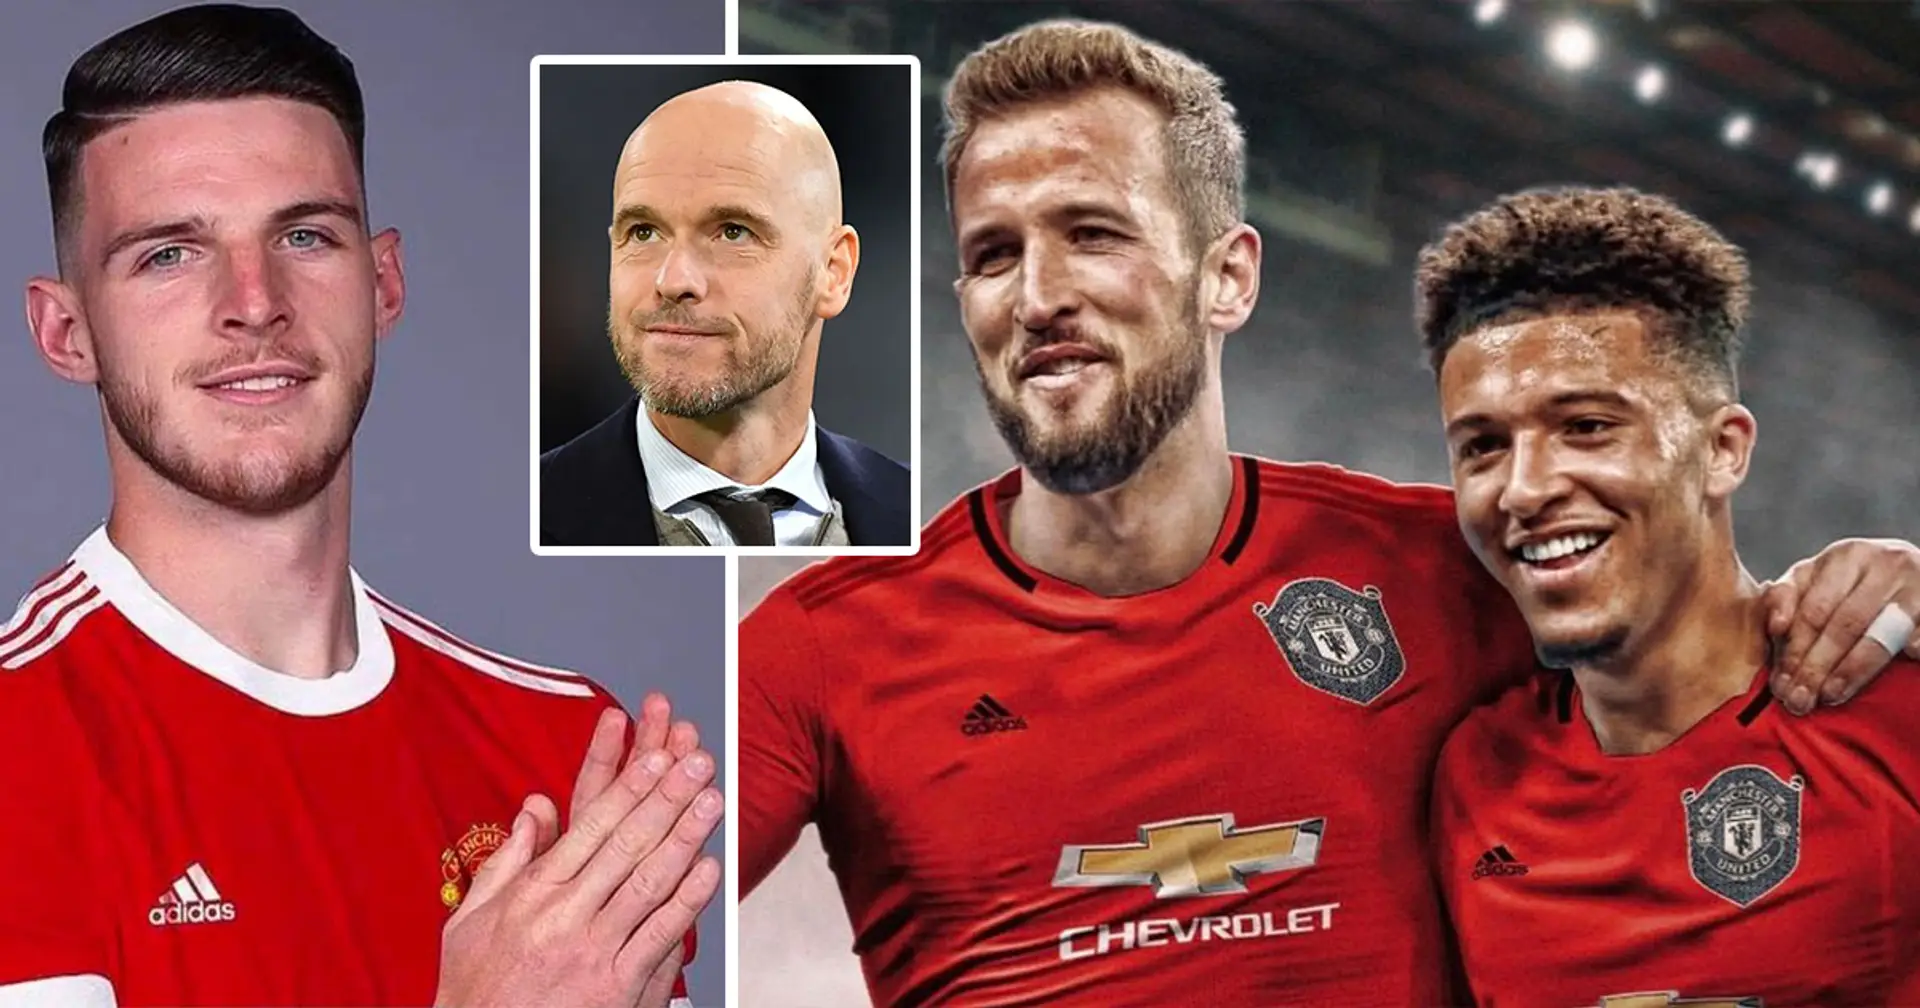 2022/23 title contenders? Man United's starting XI with Erik ten Hag's '3 top transfer targets' 